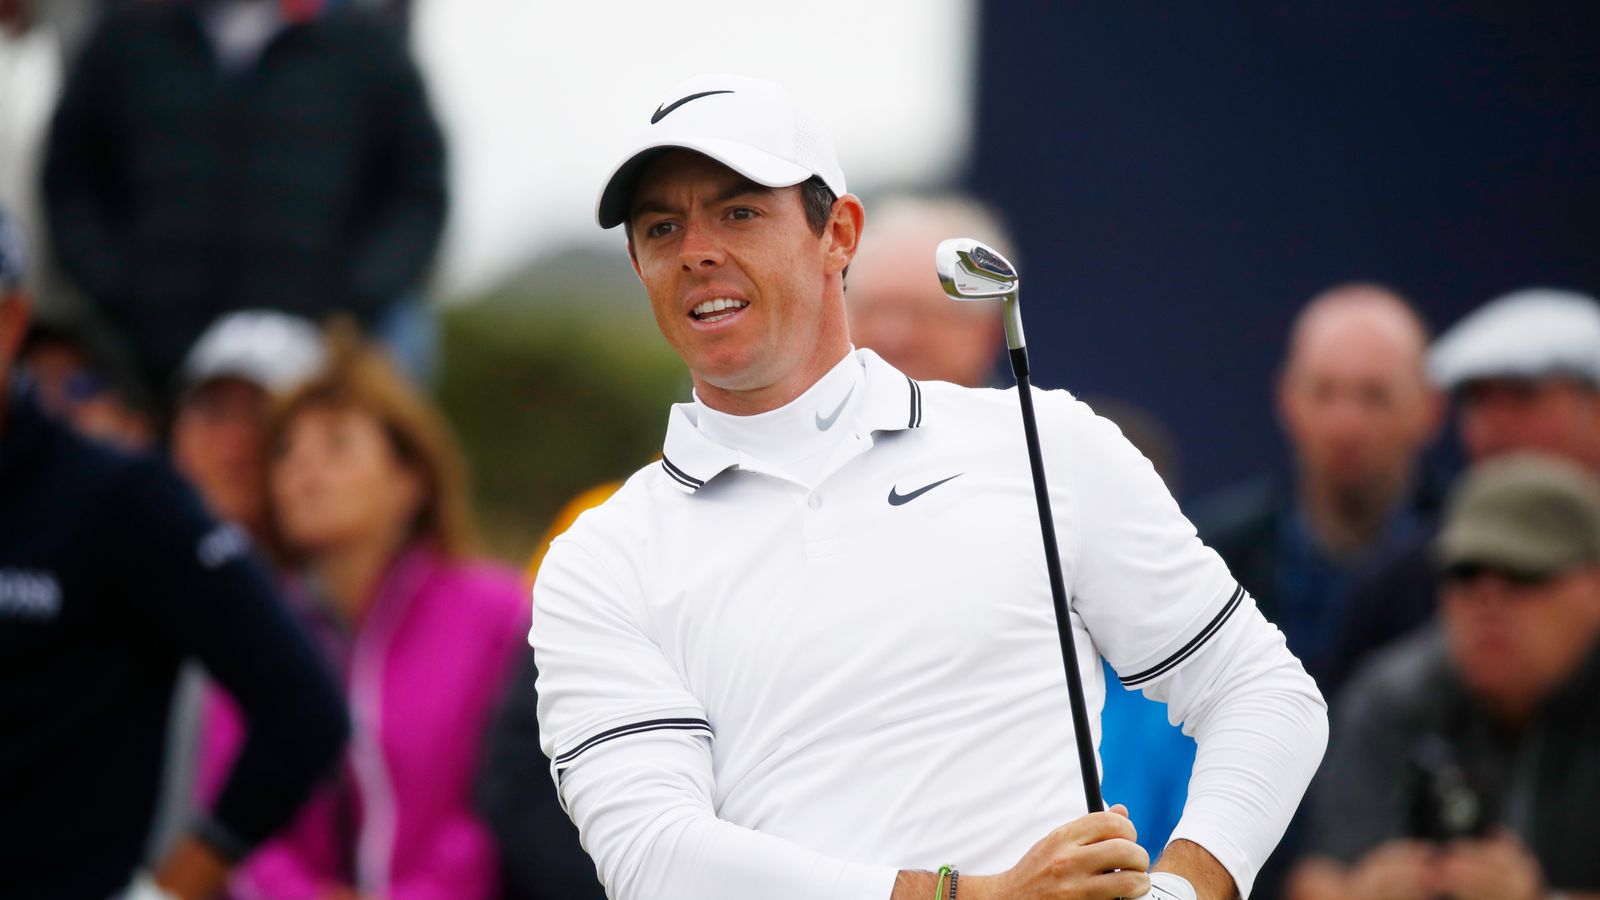 Rory McIlroy plays down poor form after missed cut at Scottish Open ...